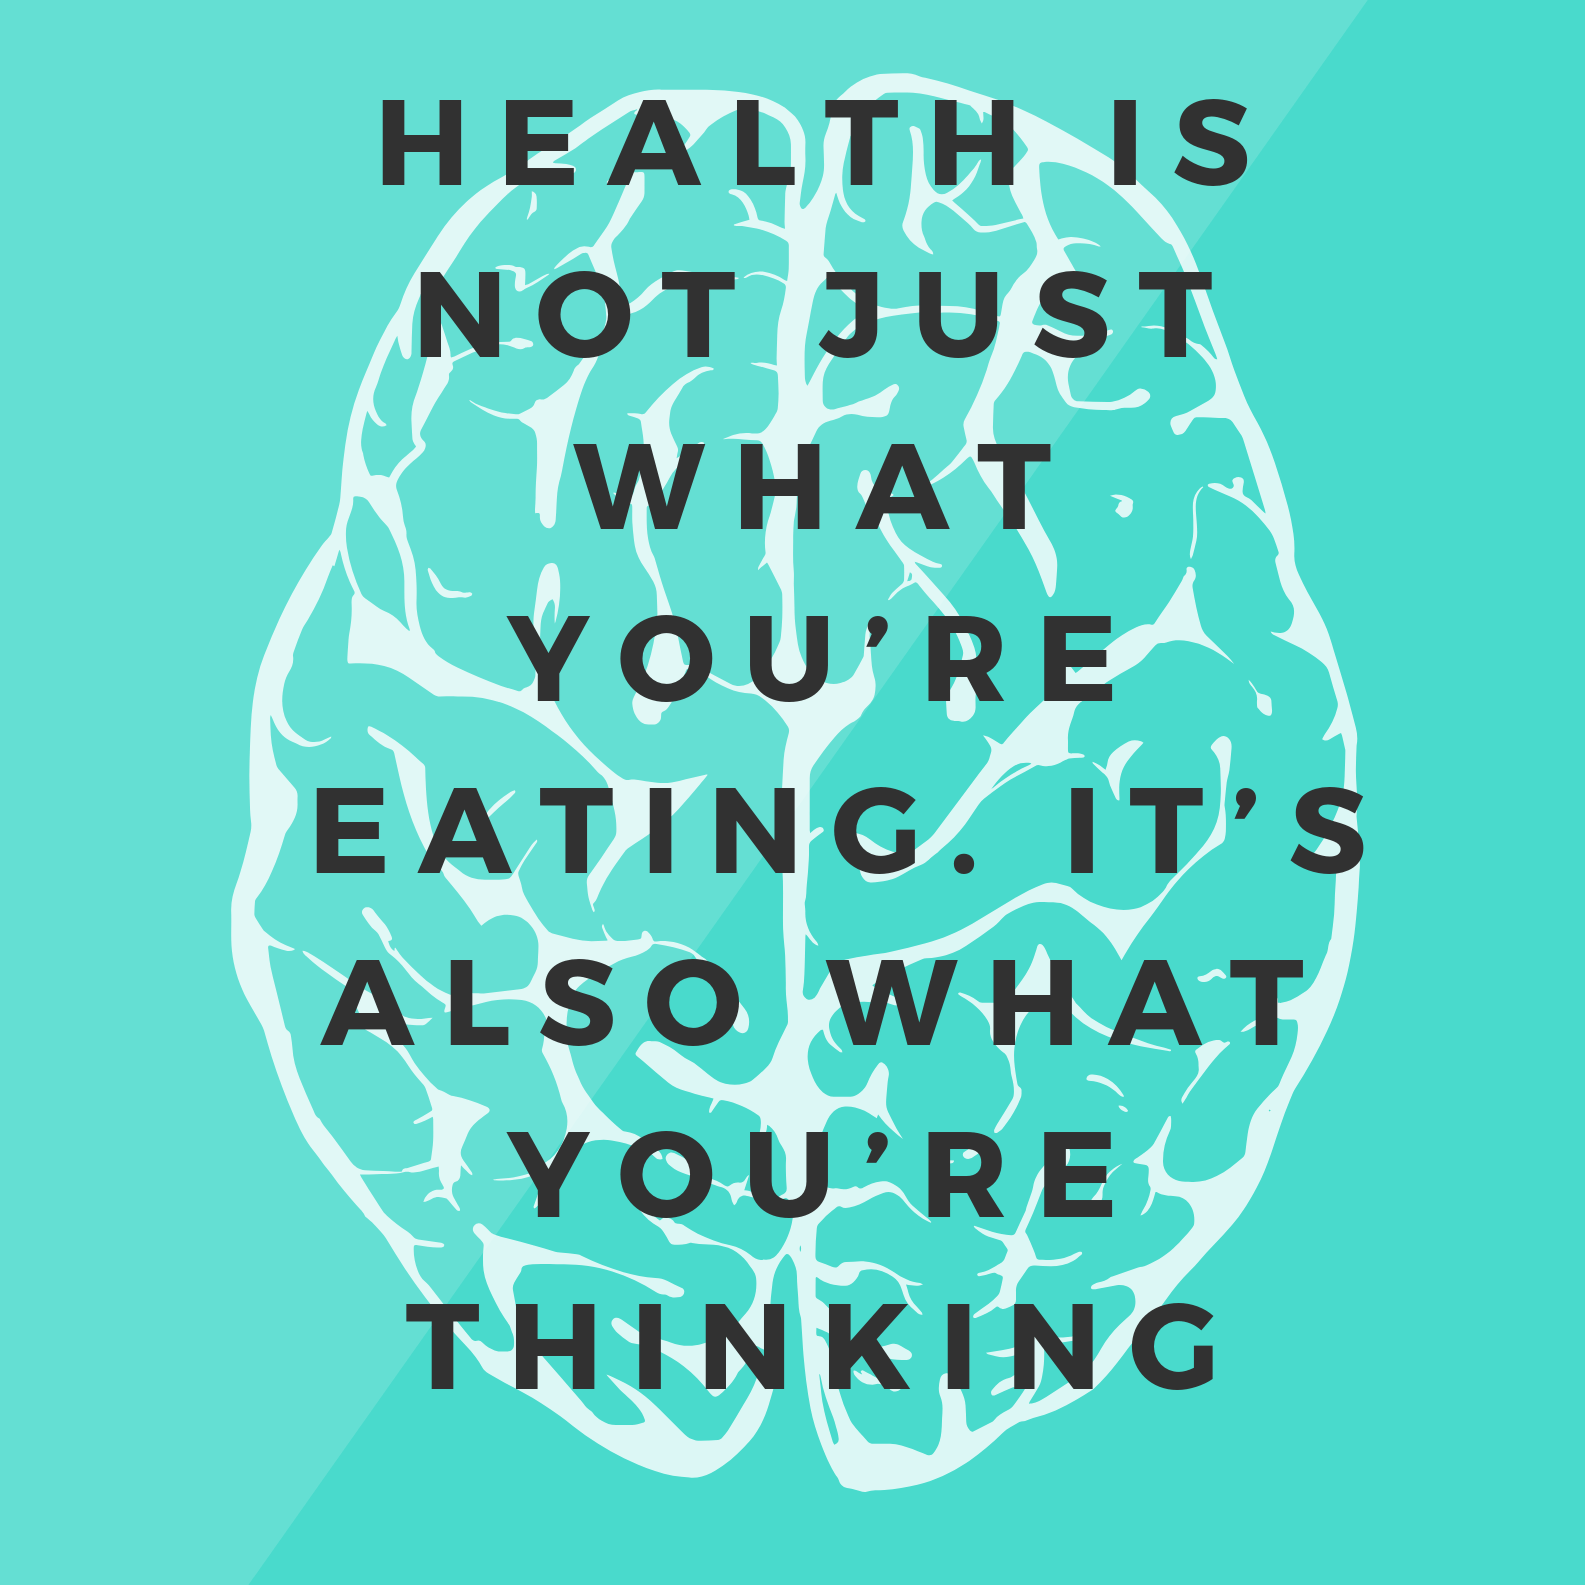 health-is-not-just-what-youre-eating.-its-also-what-yourre-thinking.png